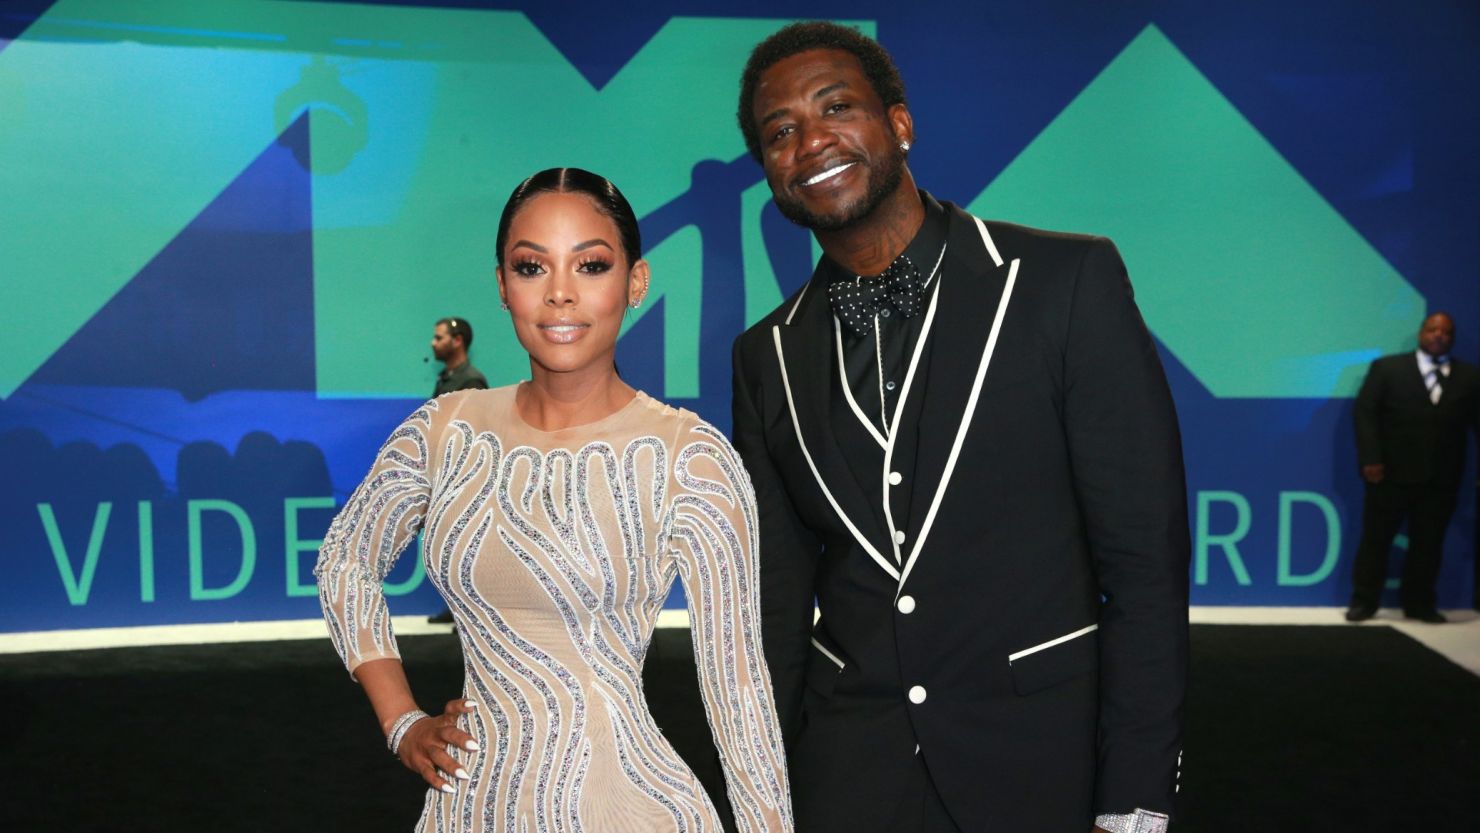 Keyshia Ka'Oir and Gucci Mane attend the 2017 MTV Video Music Awards at The Forum on August 27, 2017 in Inglewood, California.  